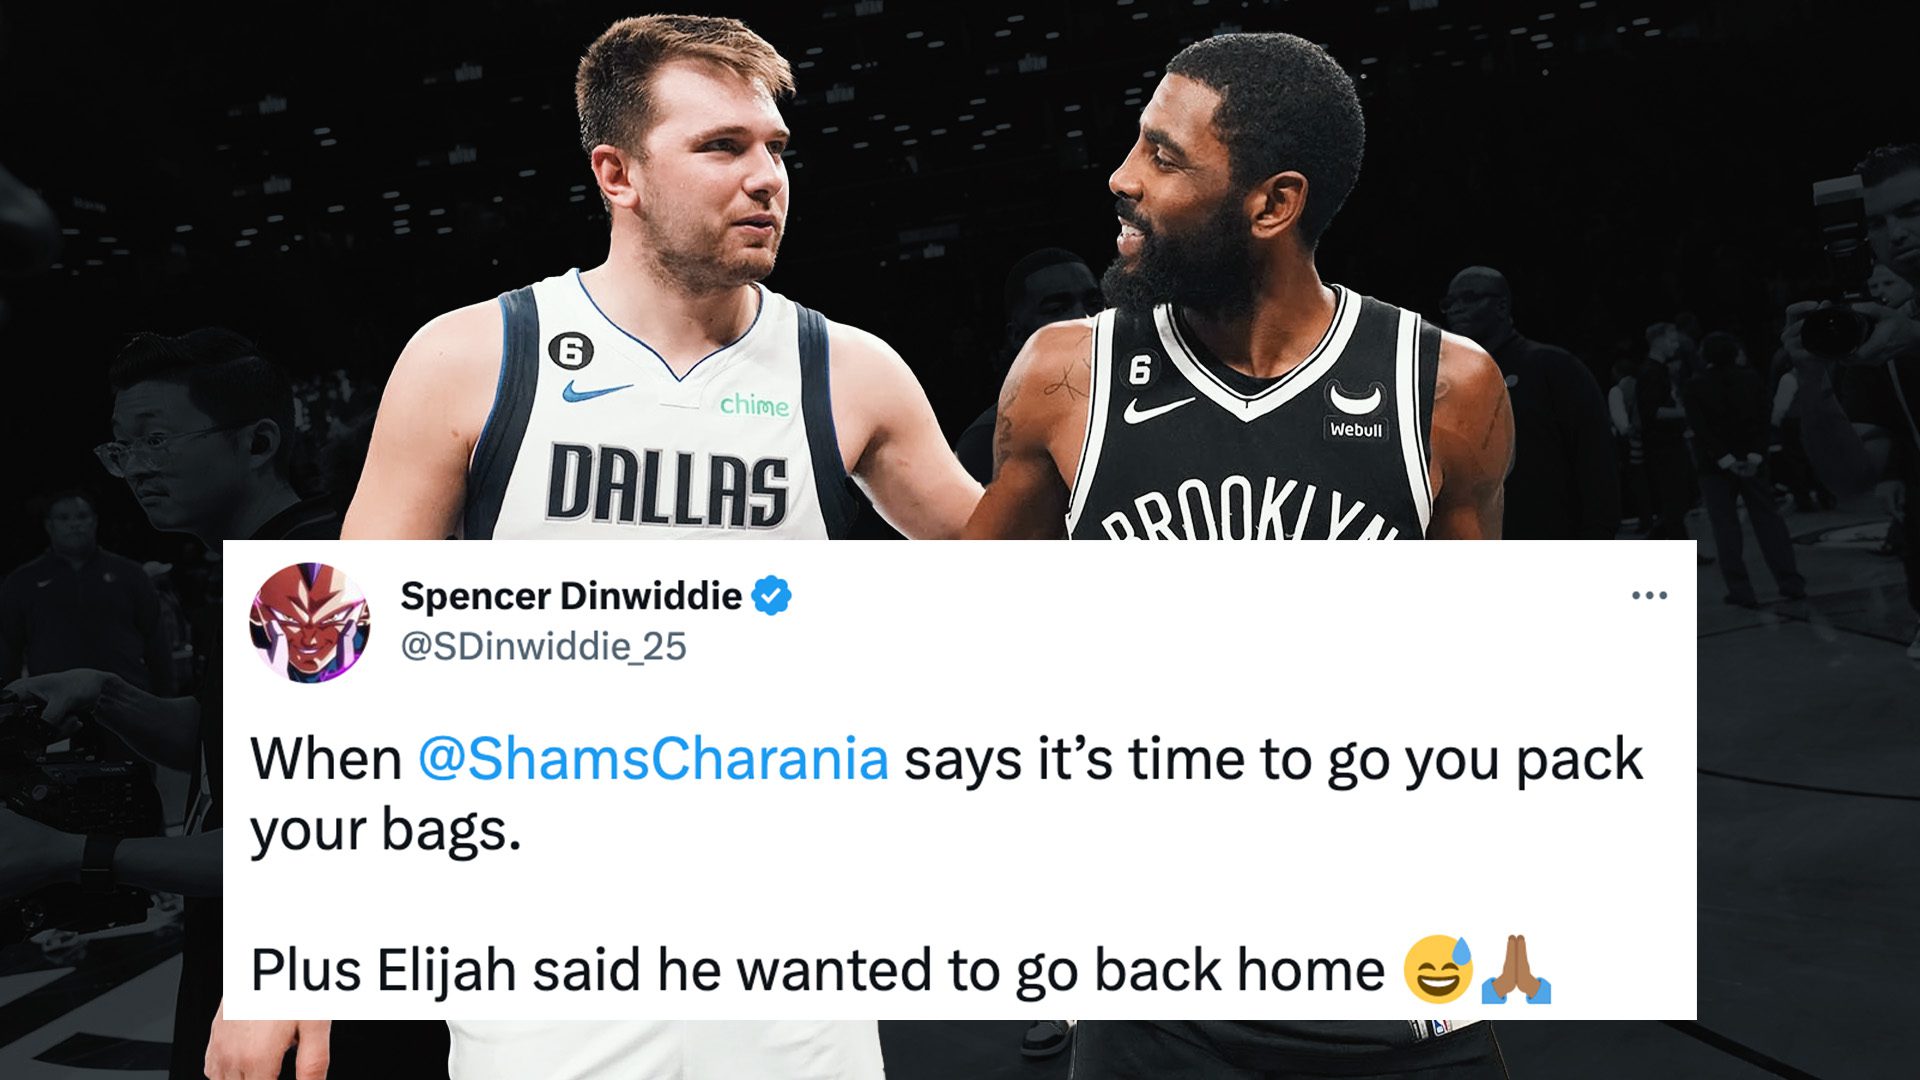 The Best Reactions to Kyrie Irving’s Dallas Trade